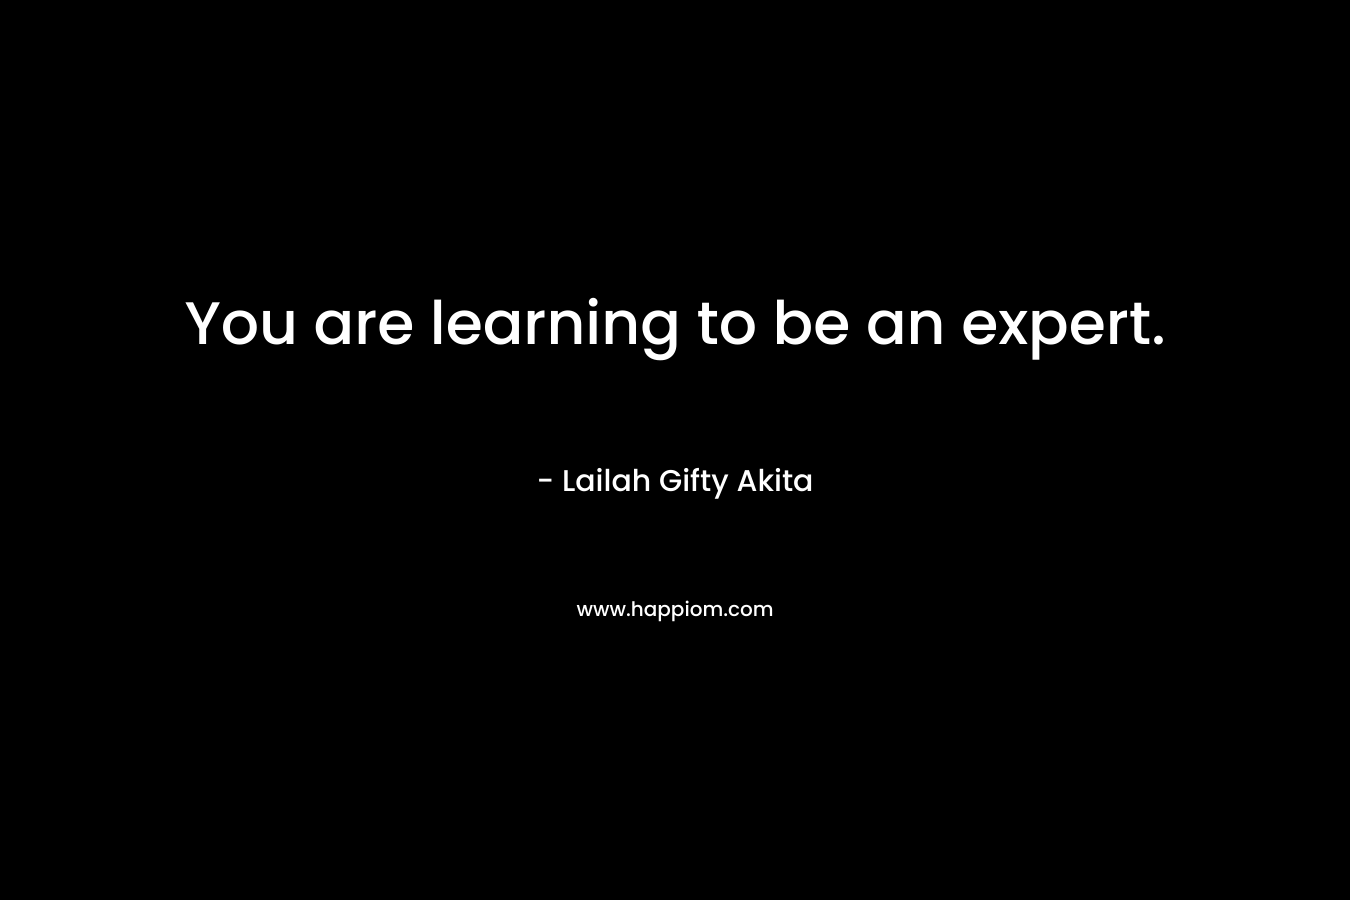 You are learning to be an expert.